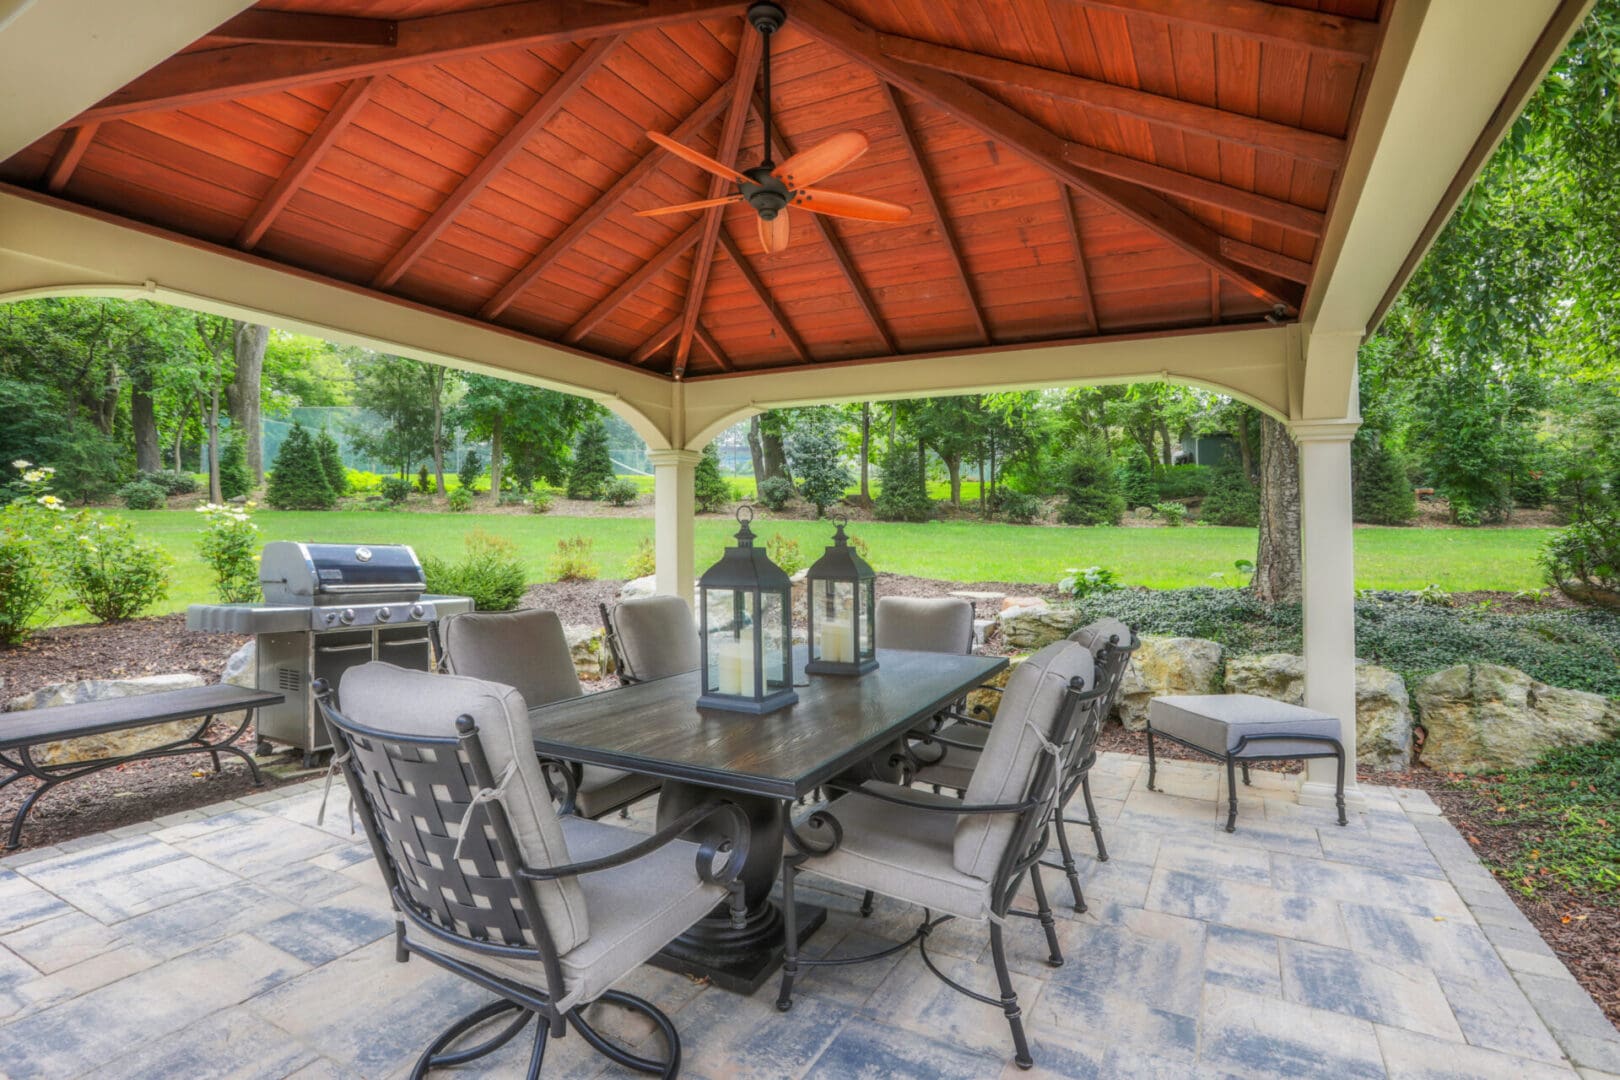 A custom gazebo with a dining table and chairs.